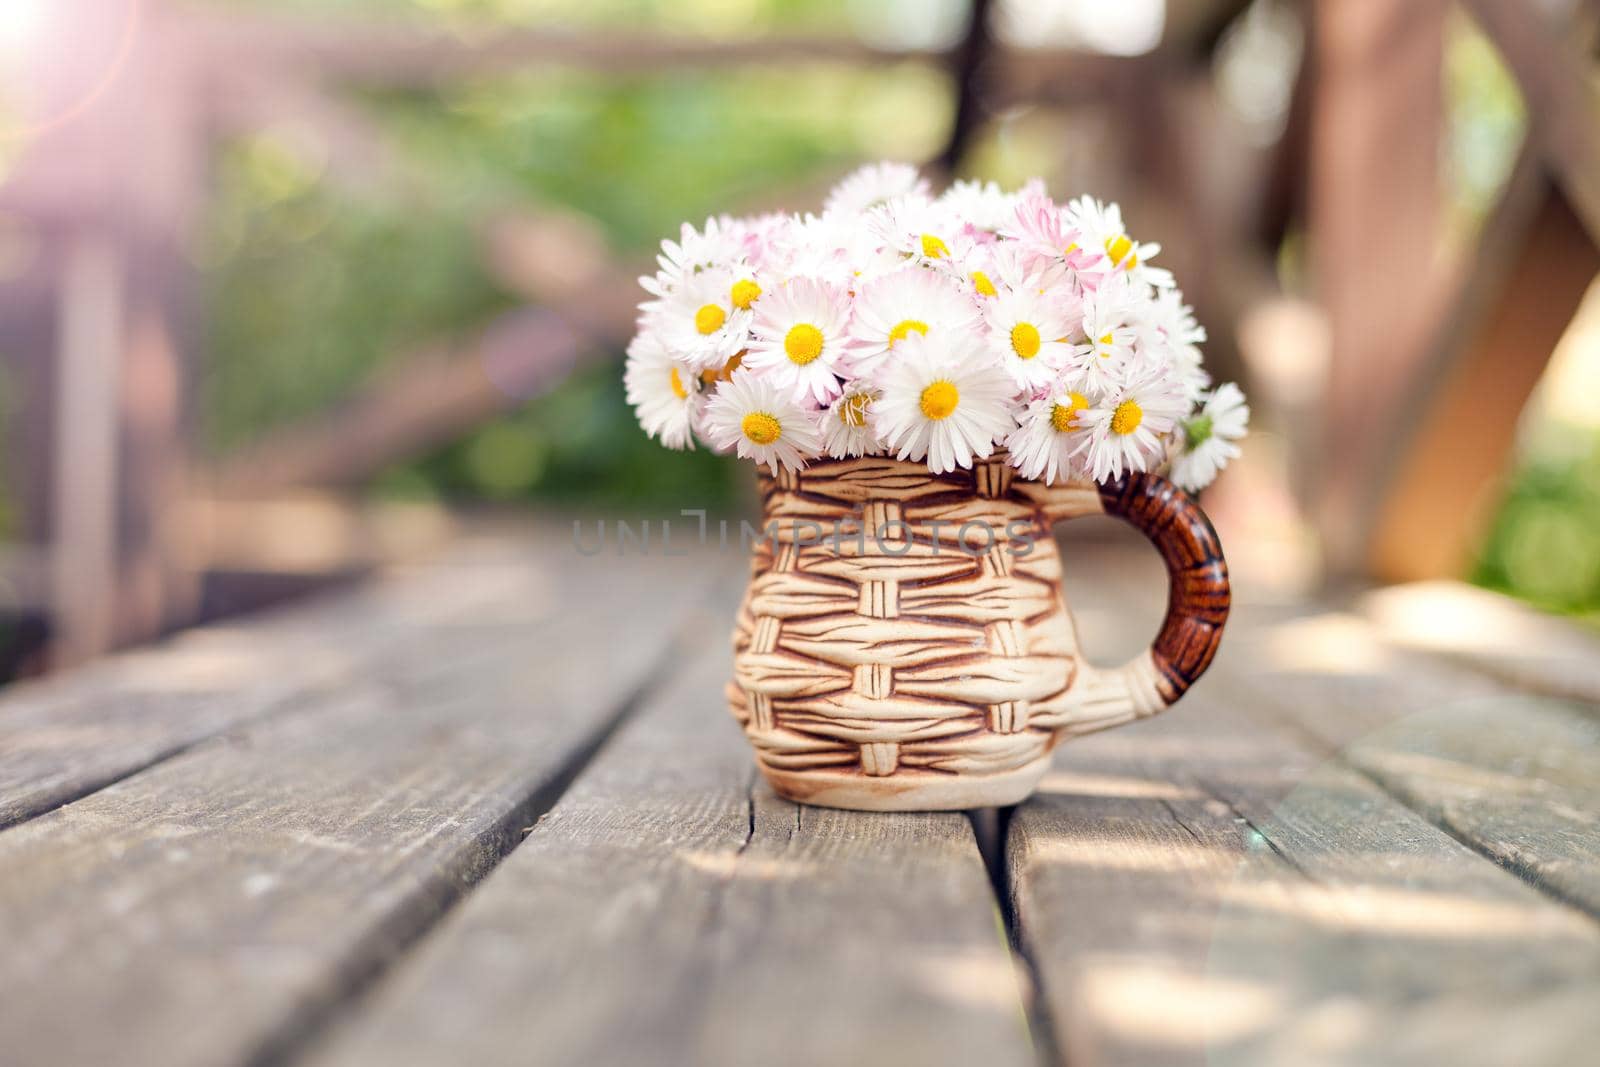 Small bouquet of daisies in the cup on grunge wooden board against green background Small floral present Daisy Bellis perennis garden flowers